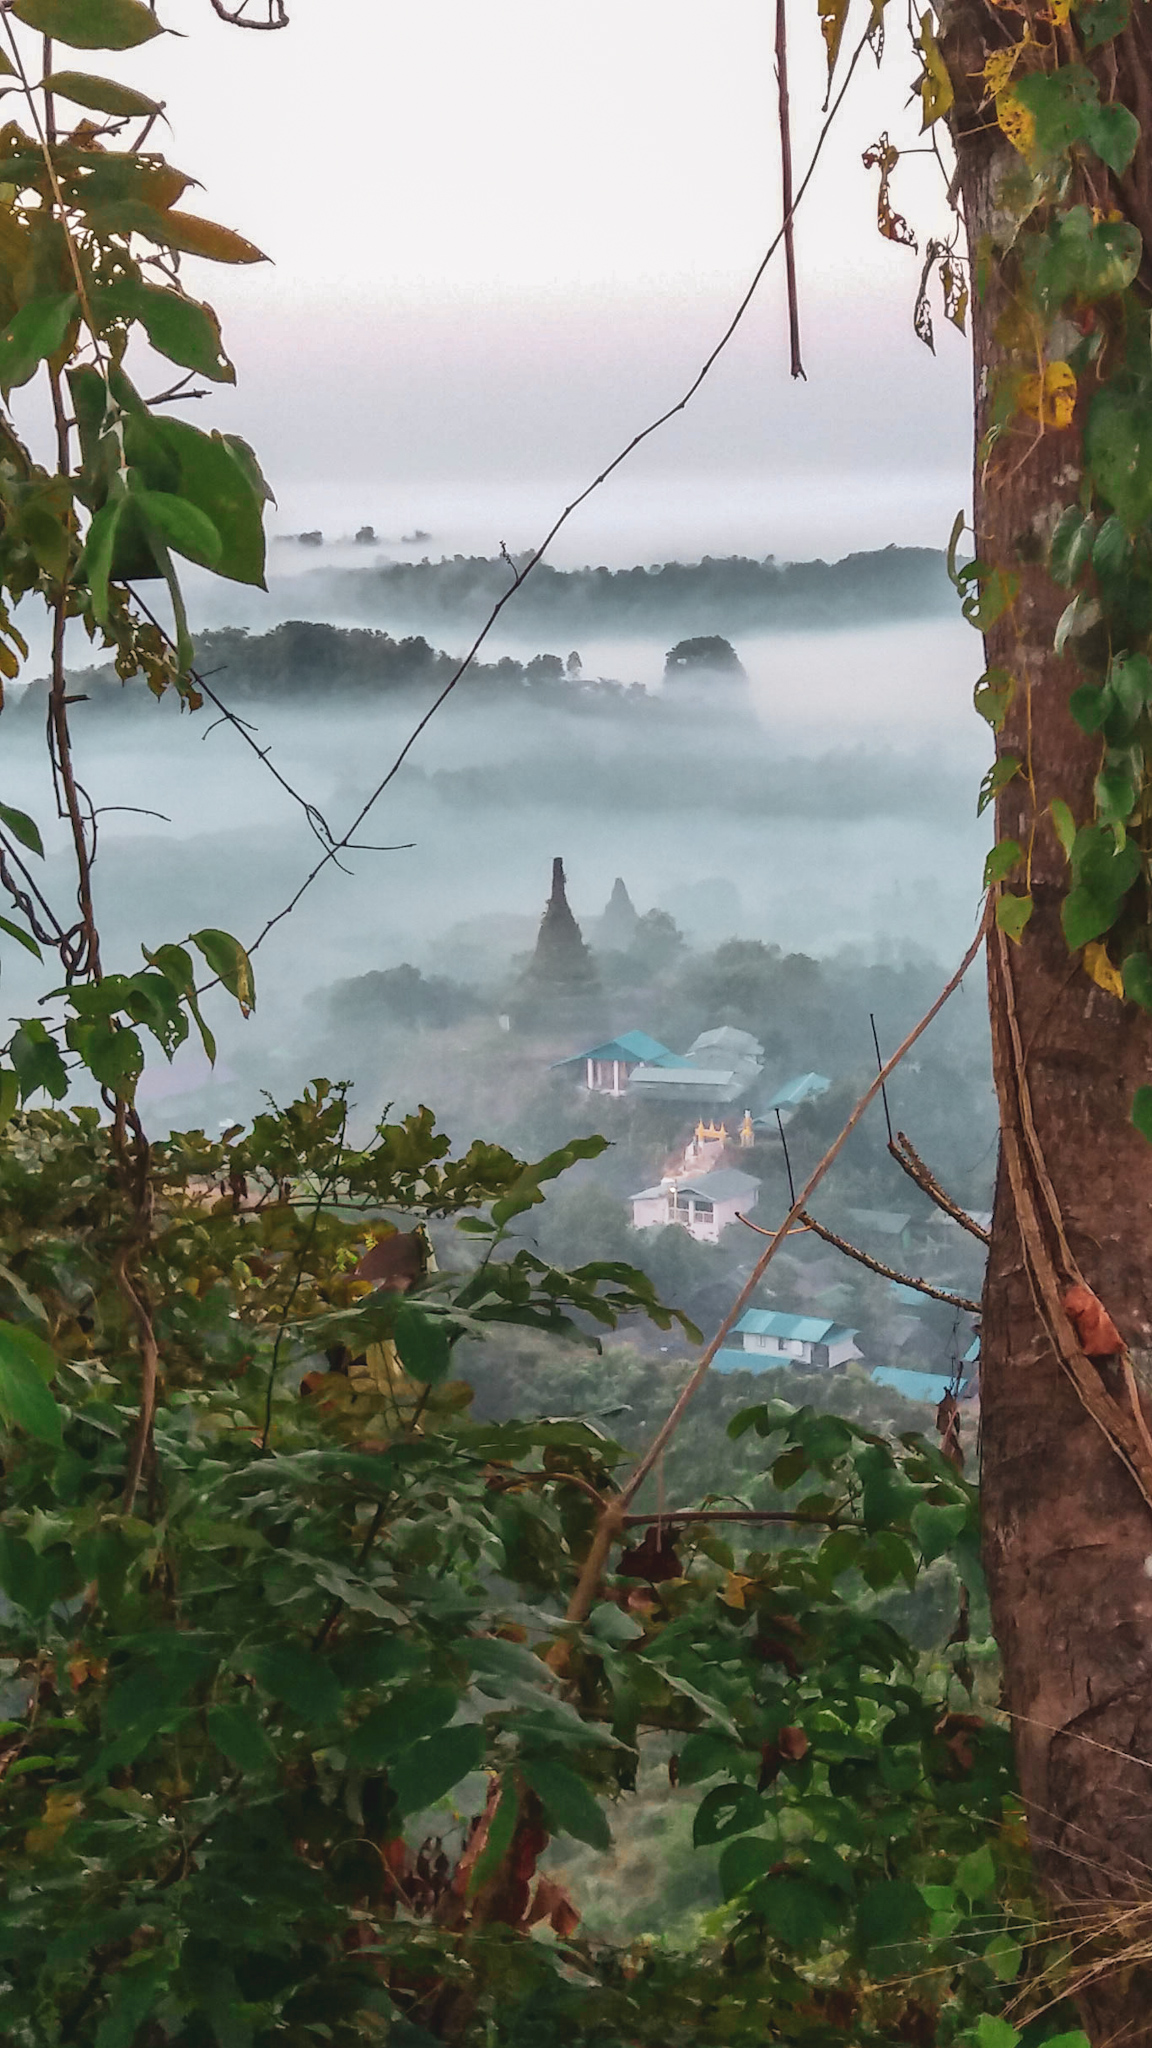 Going back to Myanmar was my ultimate travel dream now: a bike trip in Myanmar, my favorite country, to do one of the things I enjoyed the most while there.